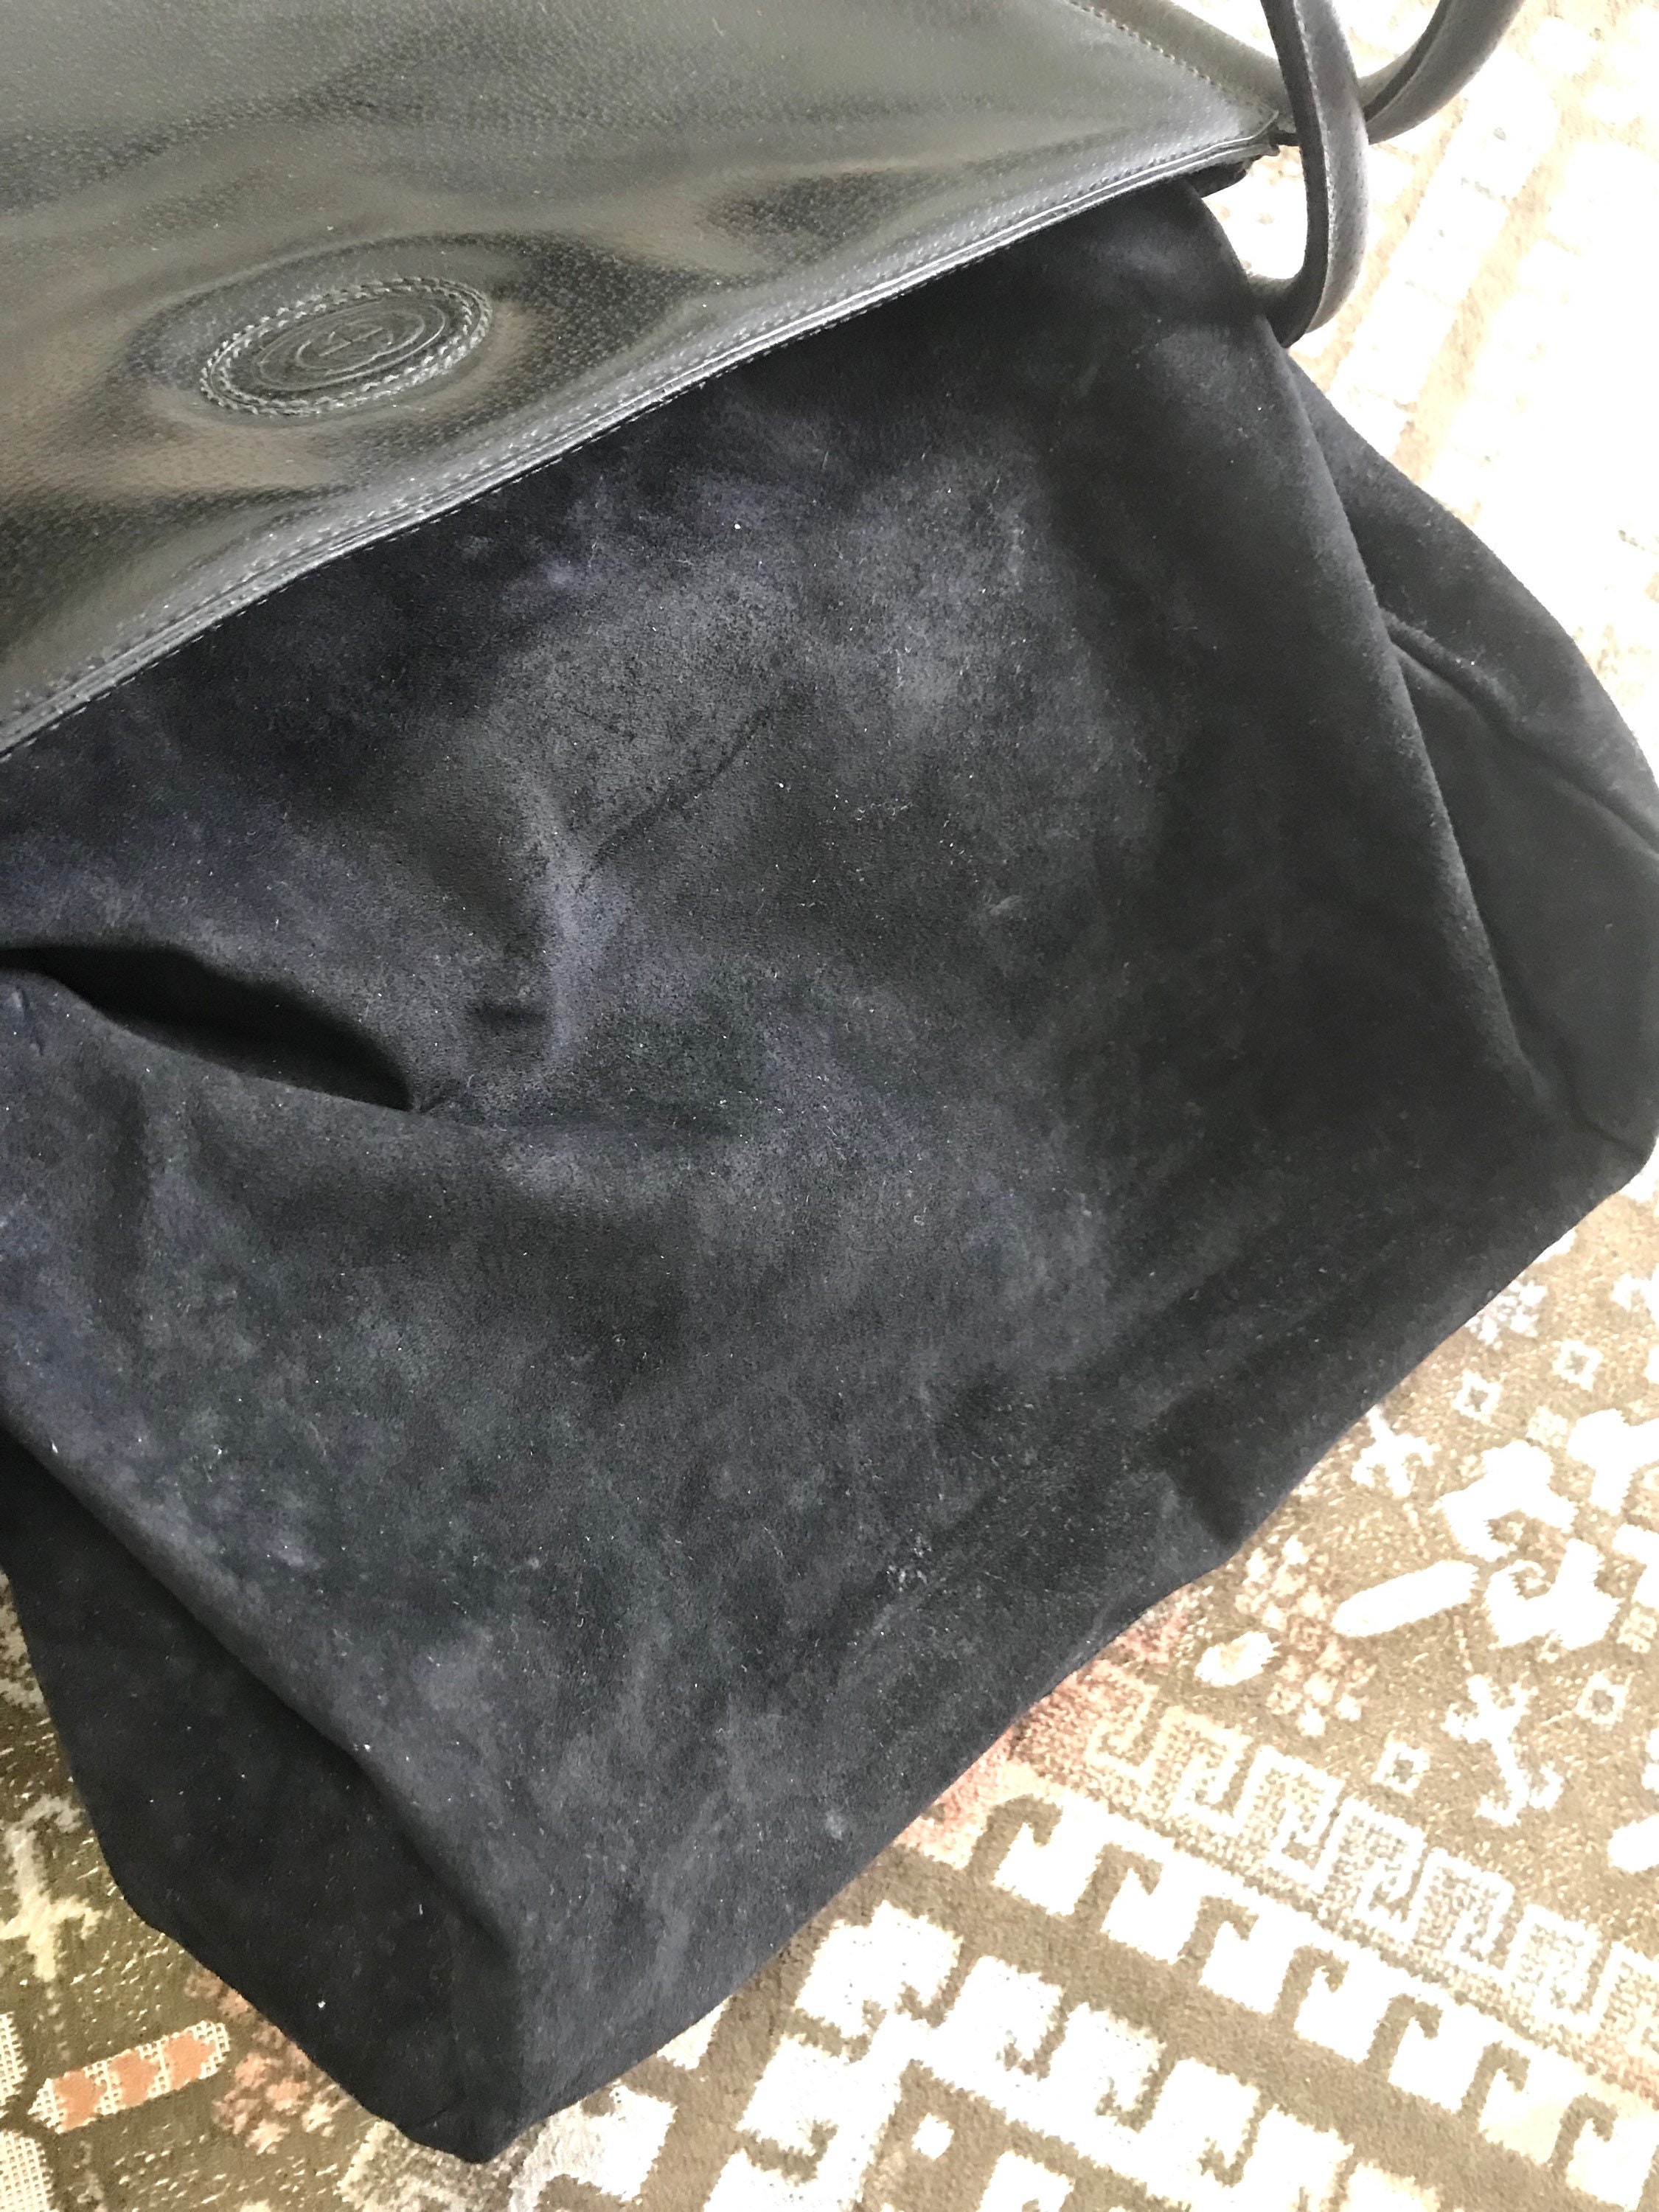 Vintage Gucci Black Pigskin Large Trapezoid Shape Shoulder Bag with Embossed GG Mark. Classic Leather Purse For Daily Use.